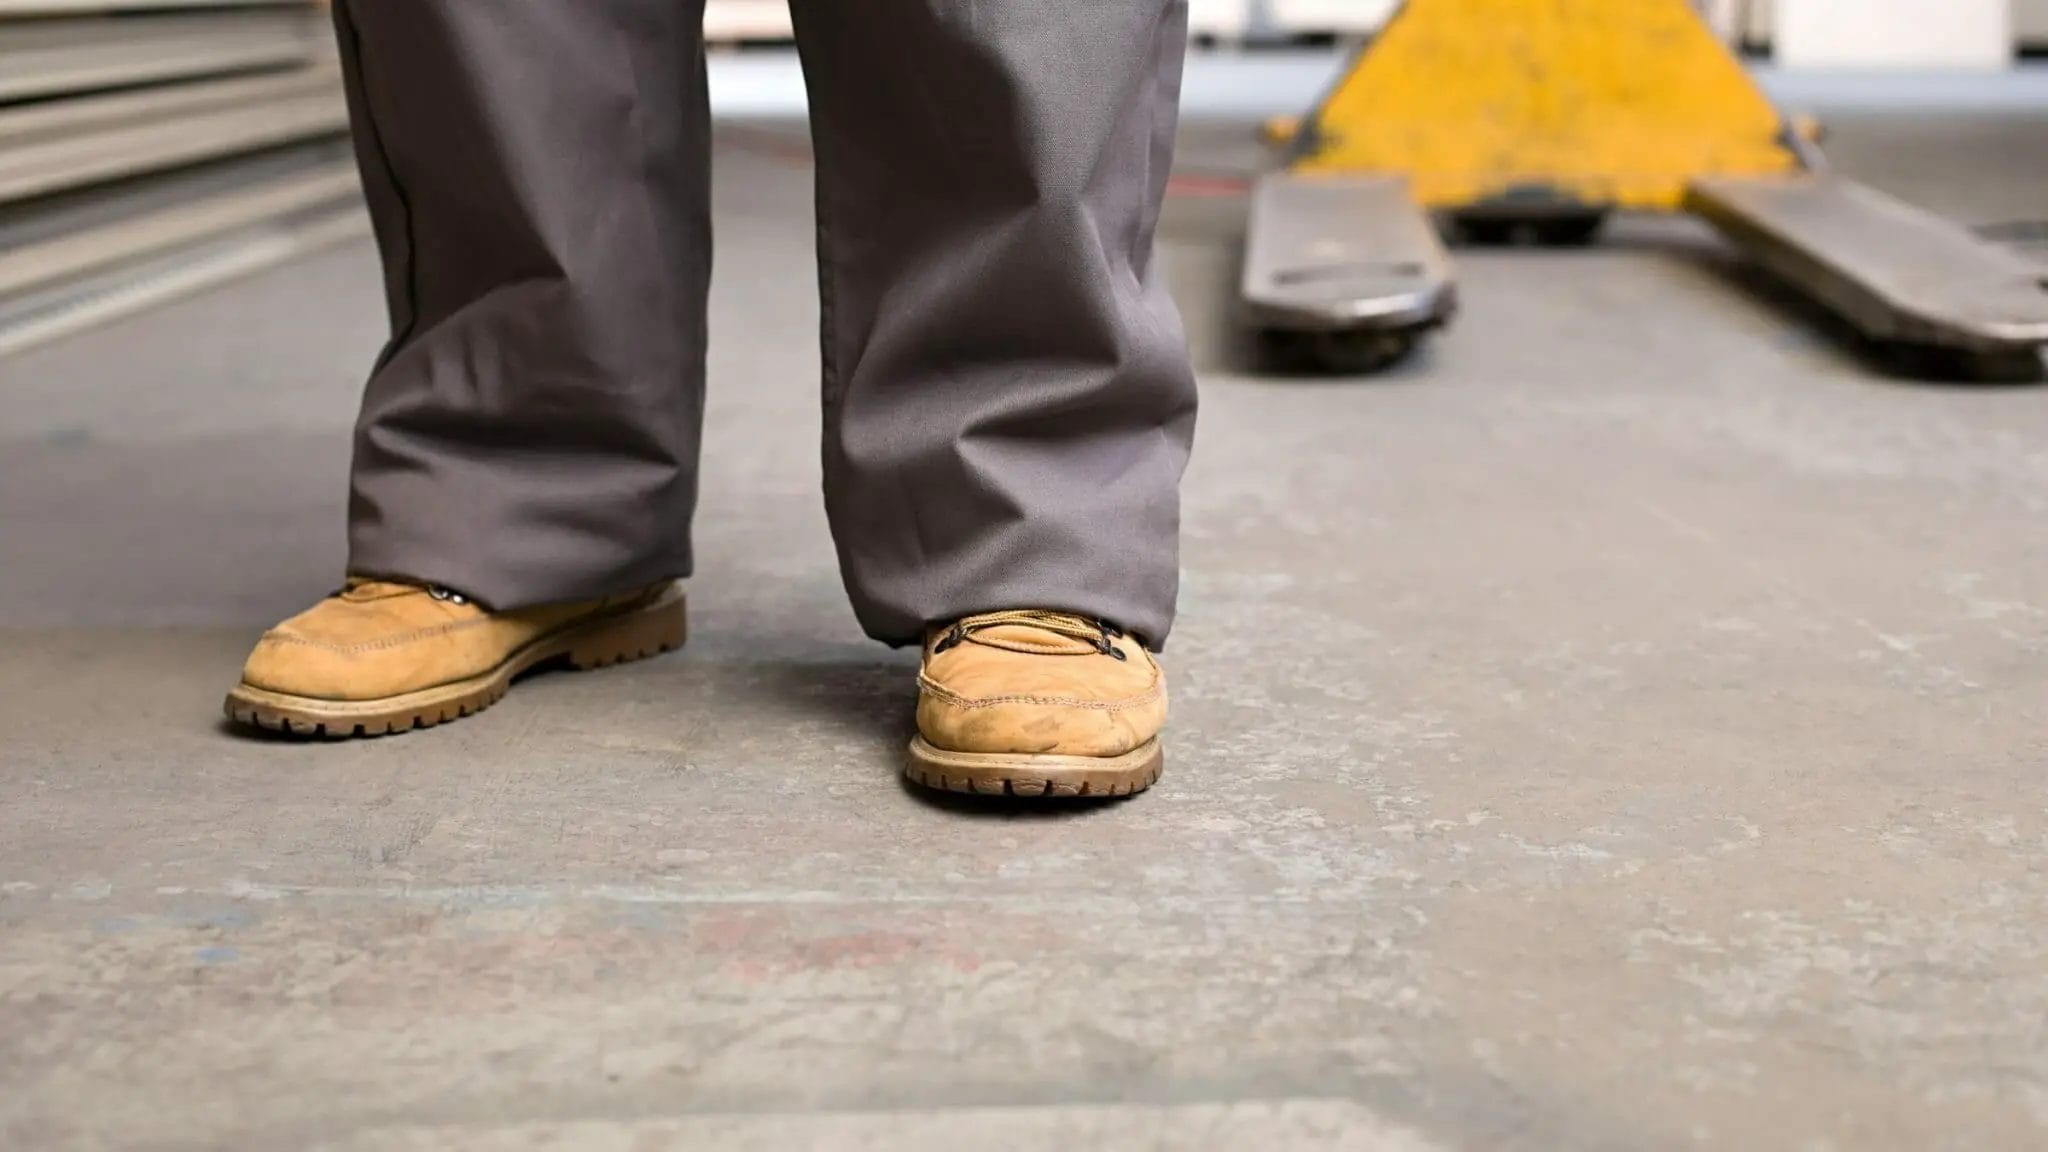 Why Wear Safety Shoes or Boots  TechSling Weblog